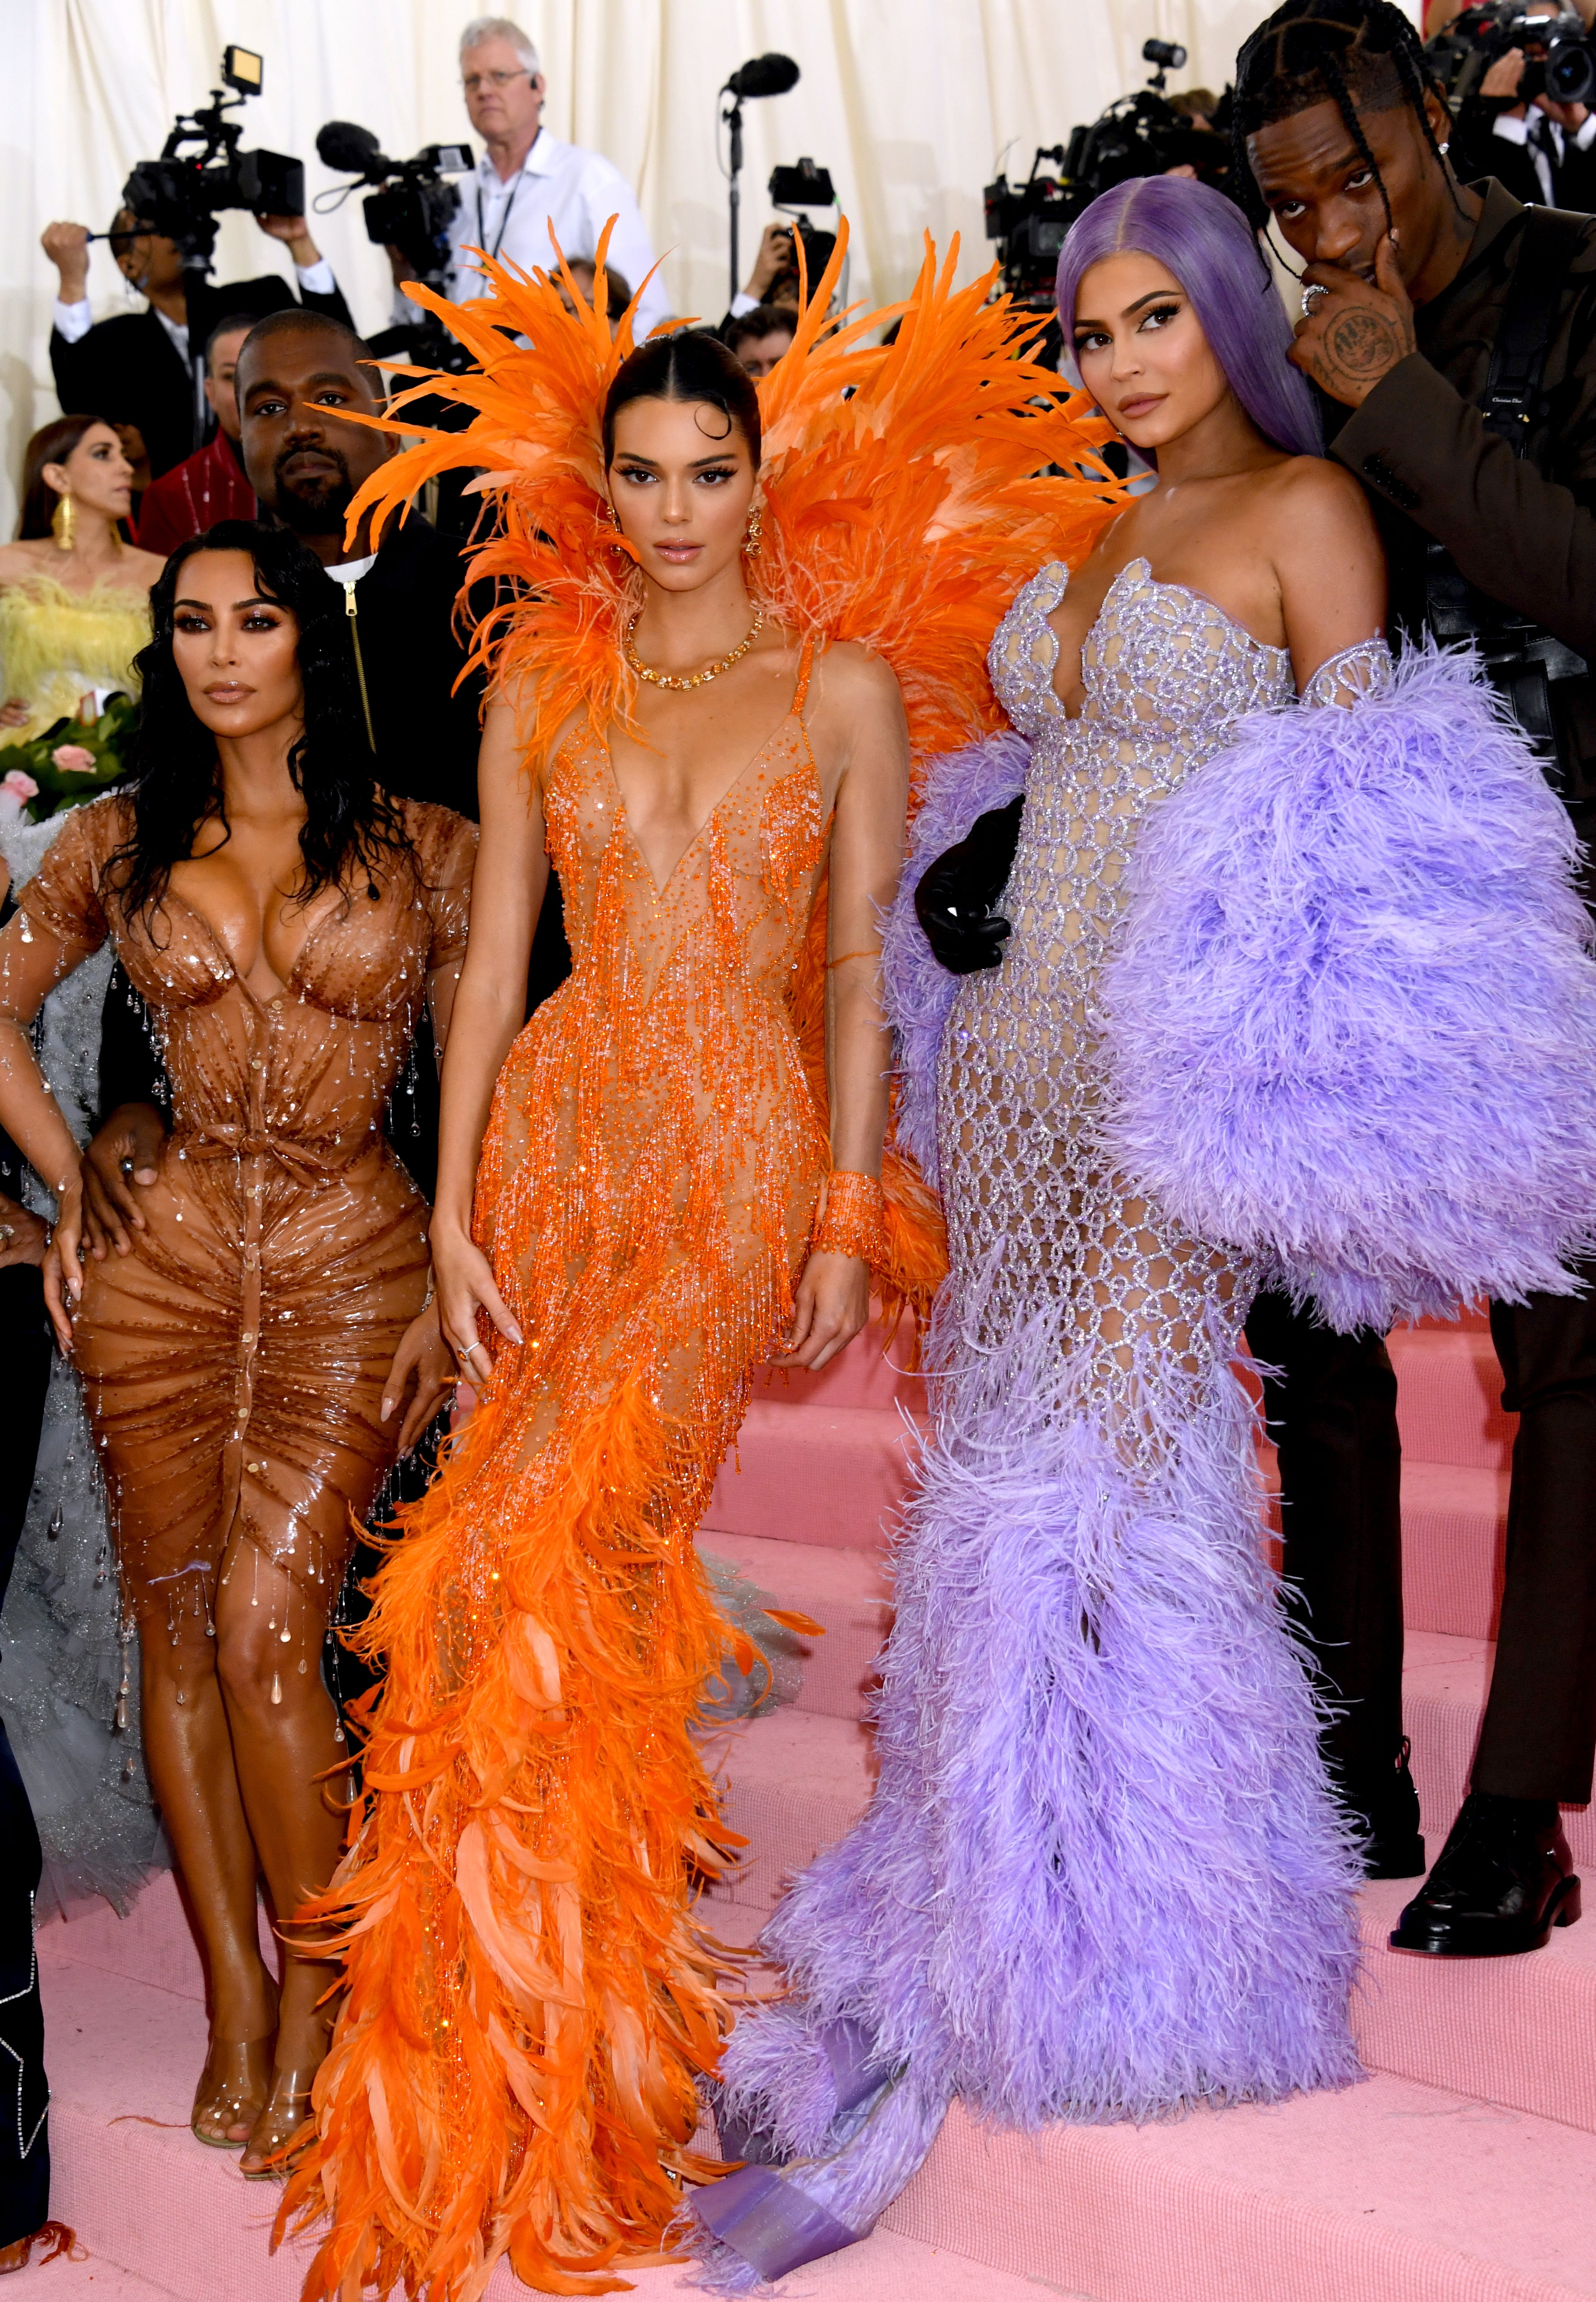 Kendall and Kylie Jenner to Host Party in New York